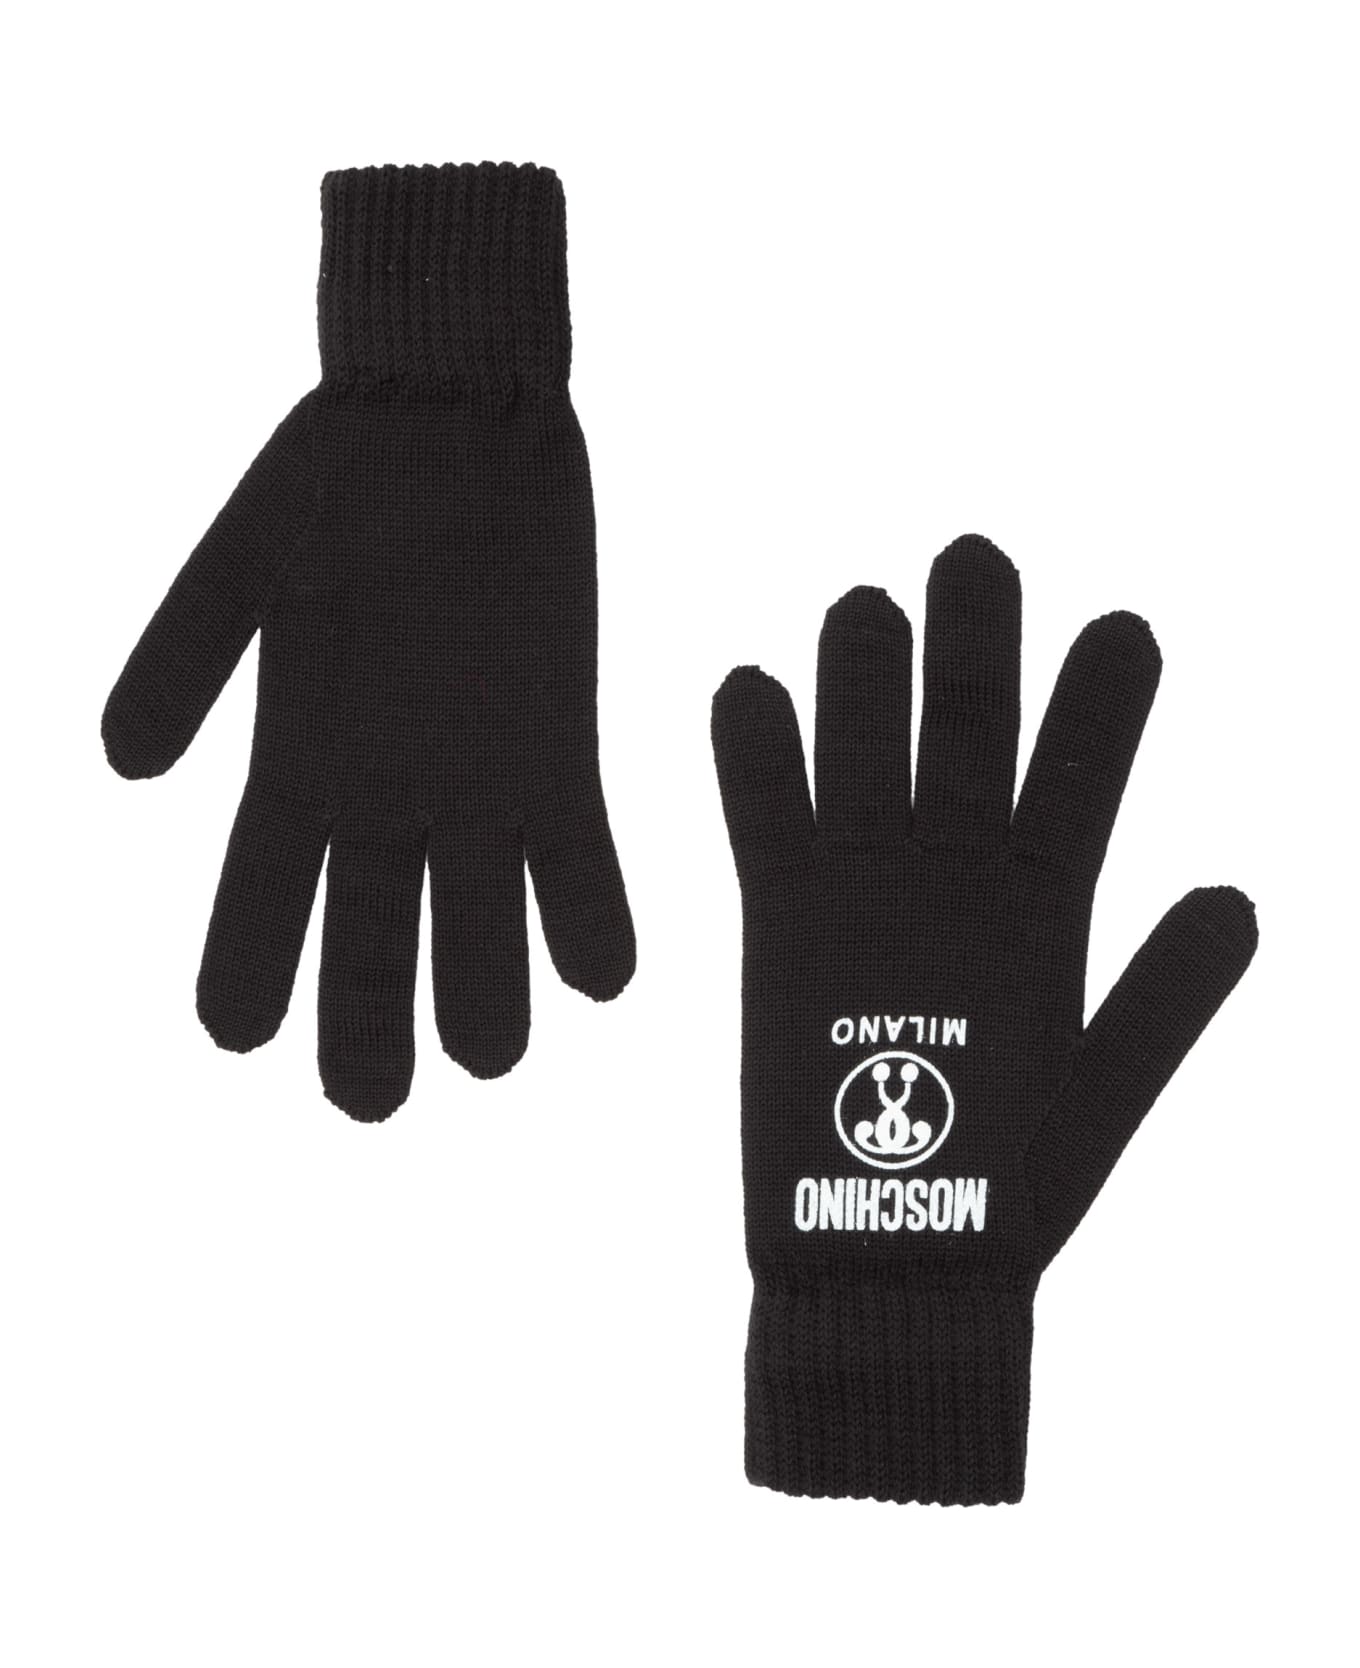 Moschino Double Question Mark Wool Gloves - Black